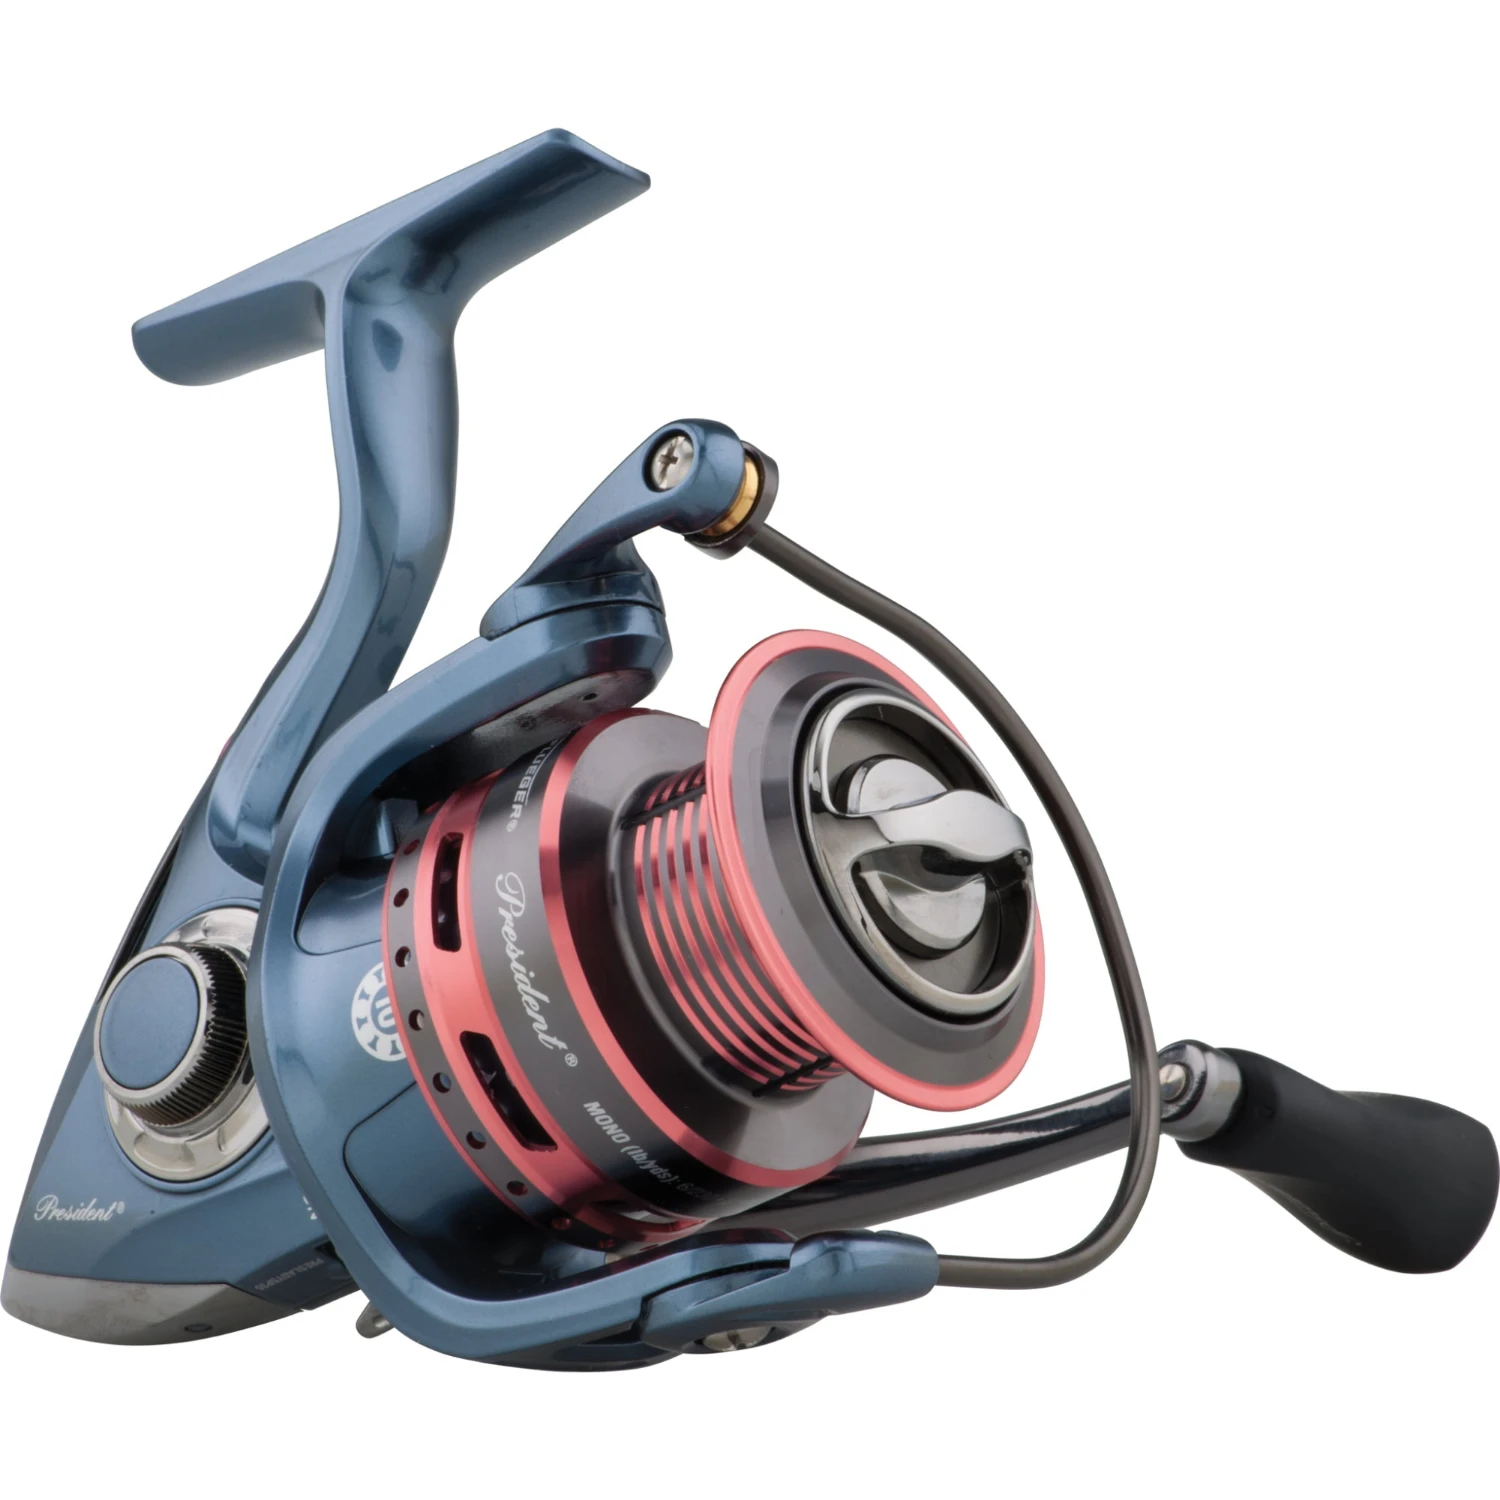 Innovative Water Resistance Spinning Reel Power Fishing Reel for Bass Pike Fishin Lady President Spinning Fishing Reel